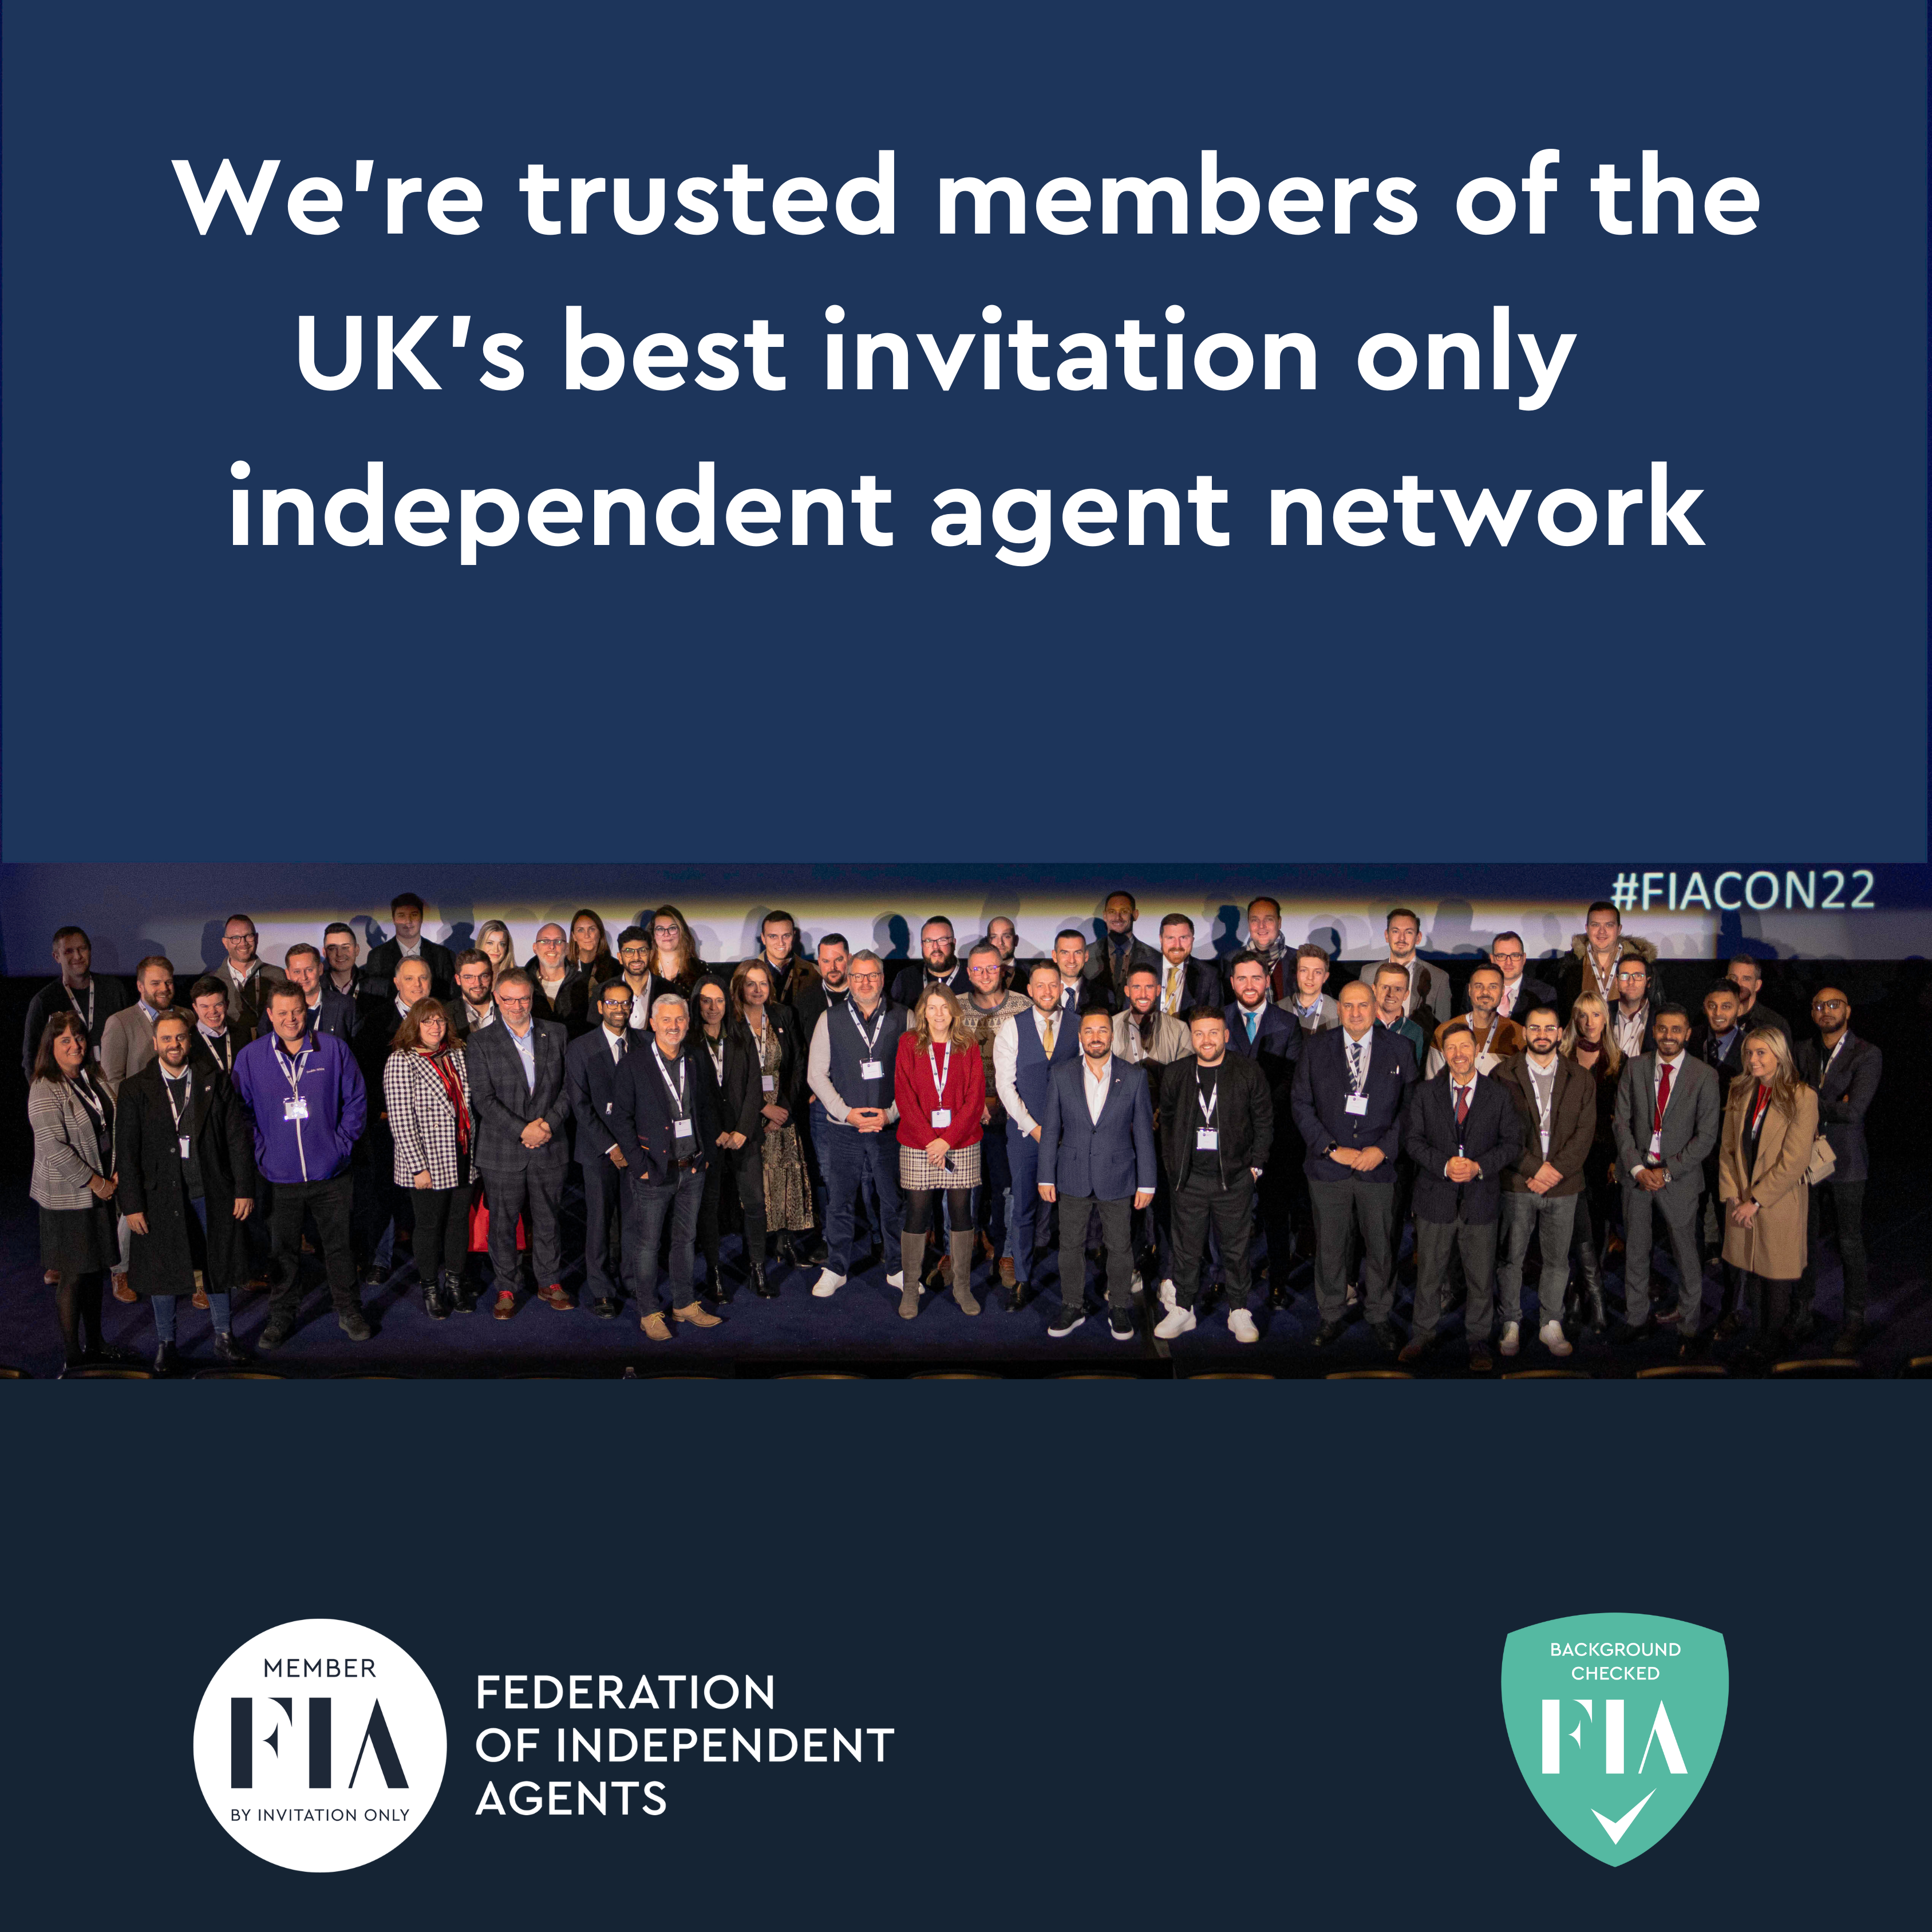 We're trusted members of the uk's best invitation only independent agent network